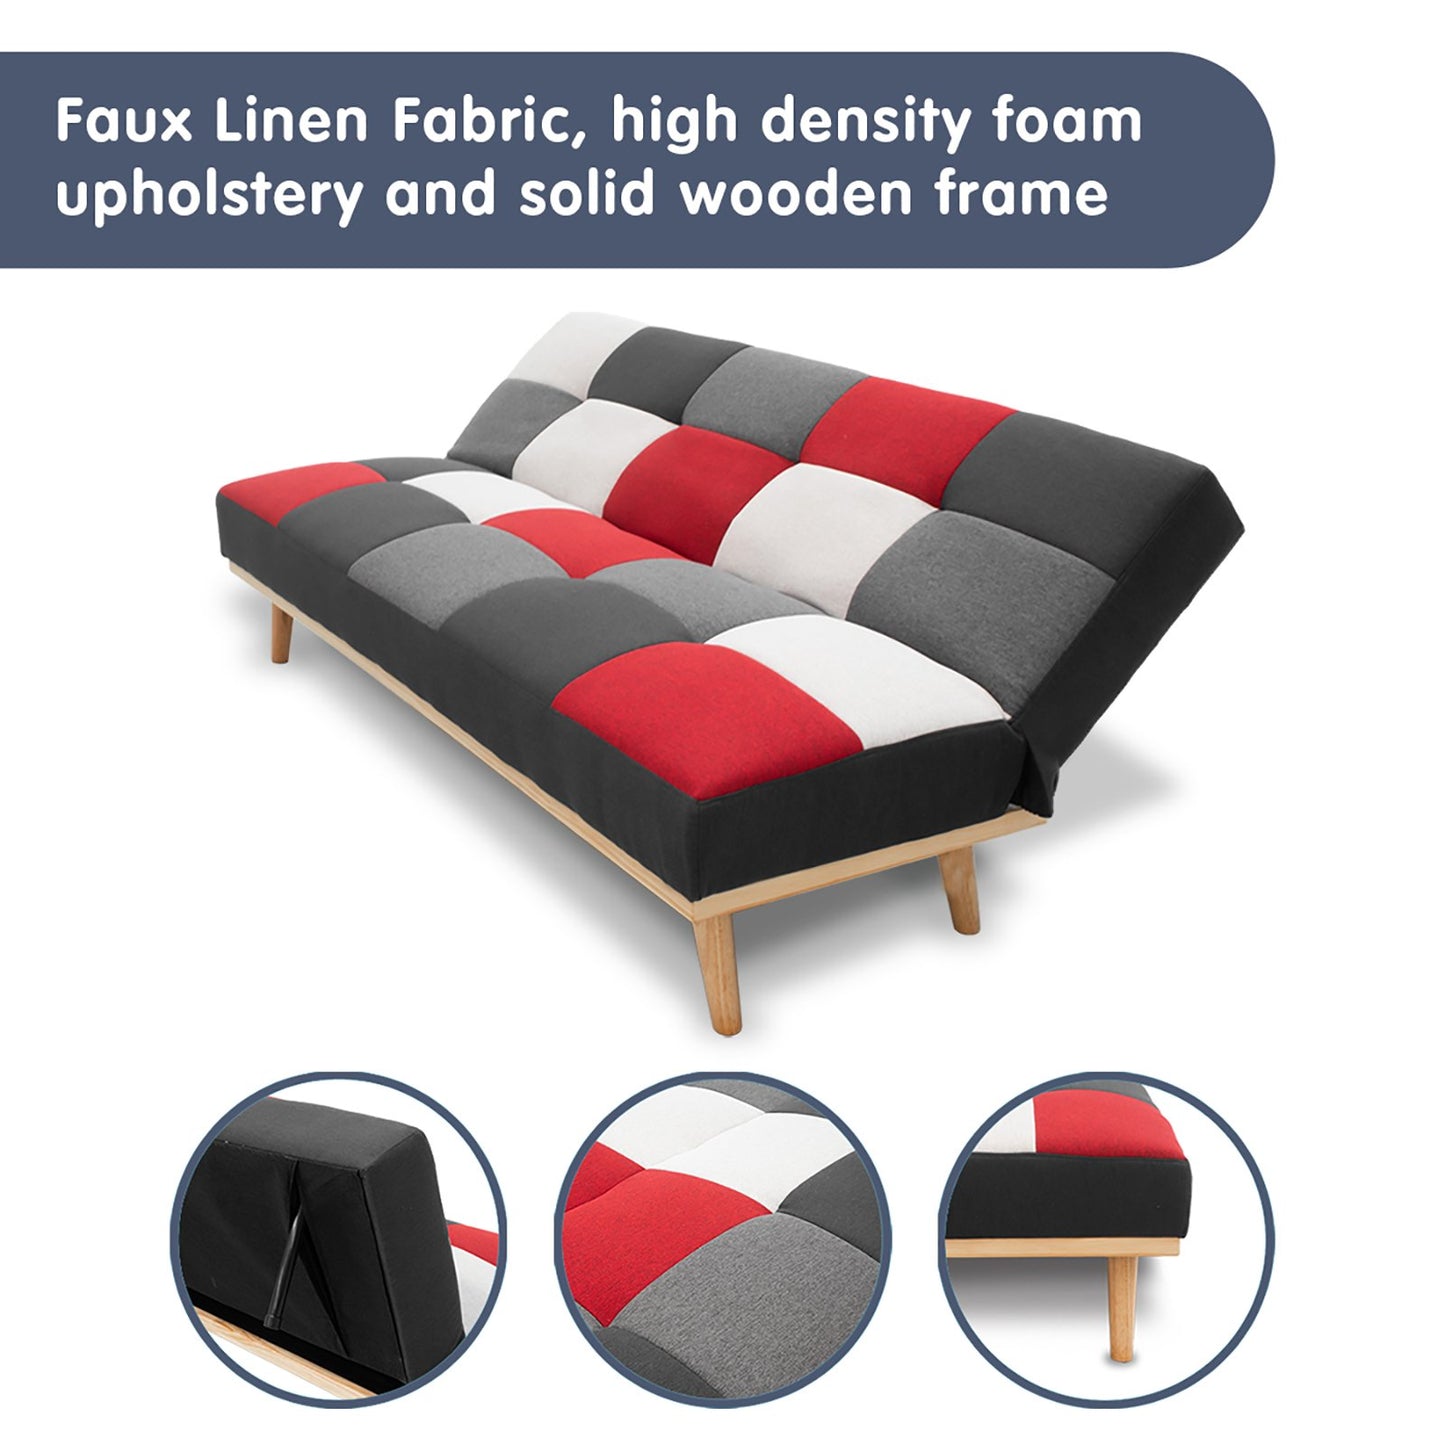 3 Seater Modular Linen Fabric Wood Sofa Bed Couch - Multi-colour